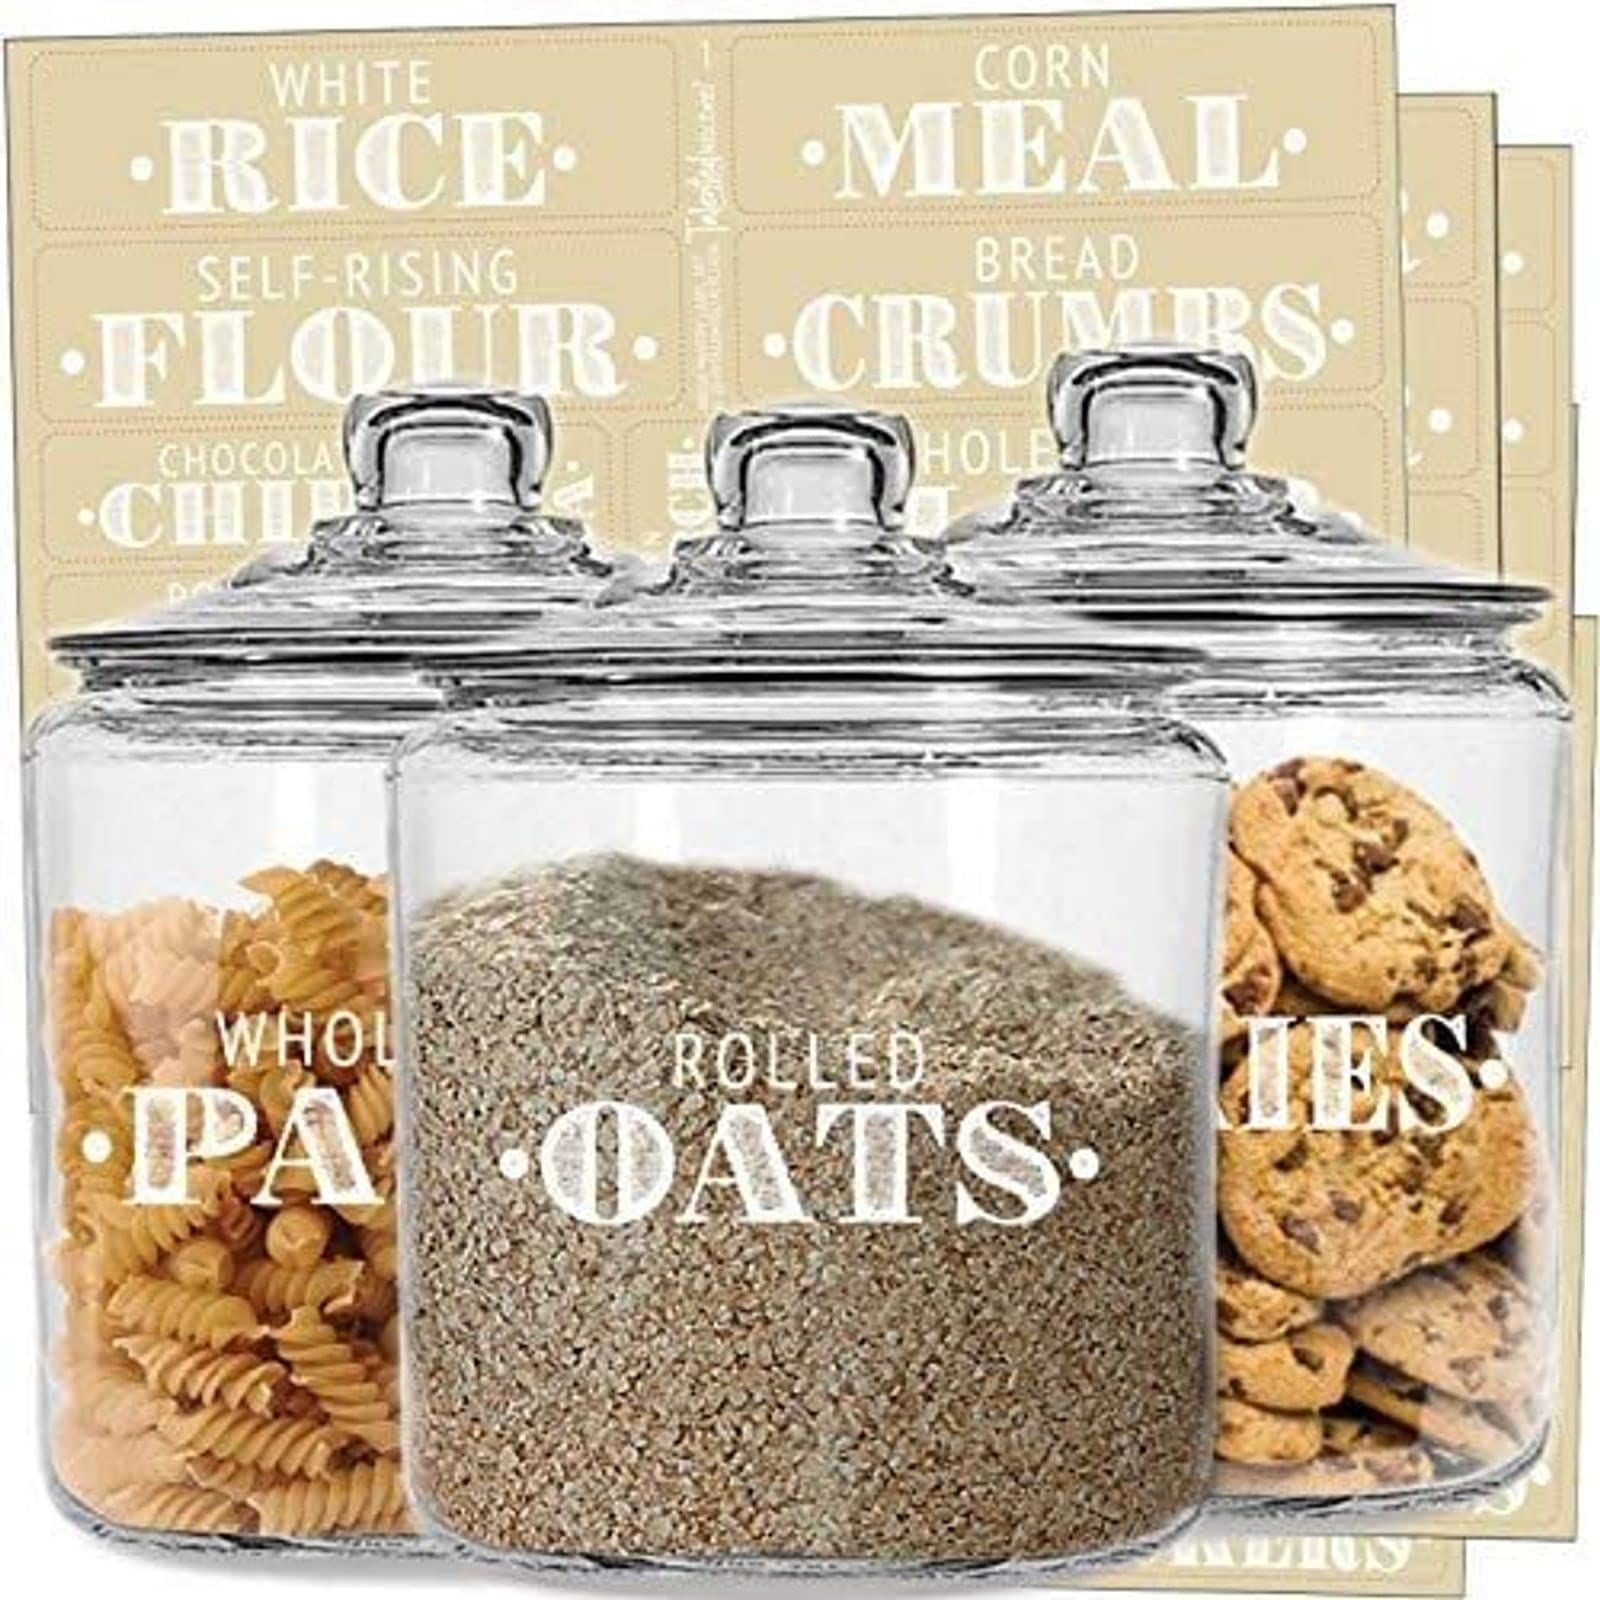 Cupboard Organisation. Vinyl Sticker Decal Labels for Jars Containers Self Raising Kitchen Plain and Bread Flour Pantry 